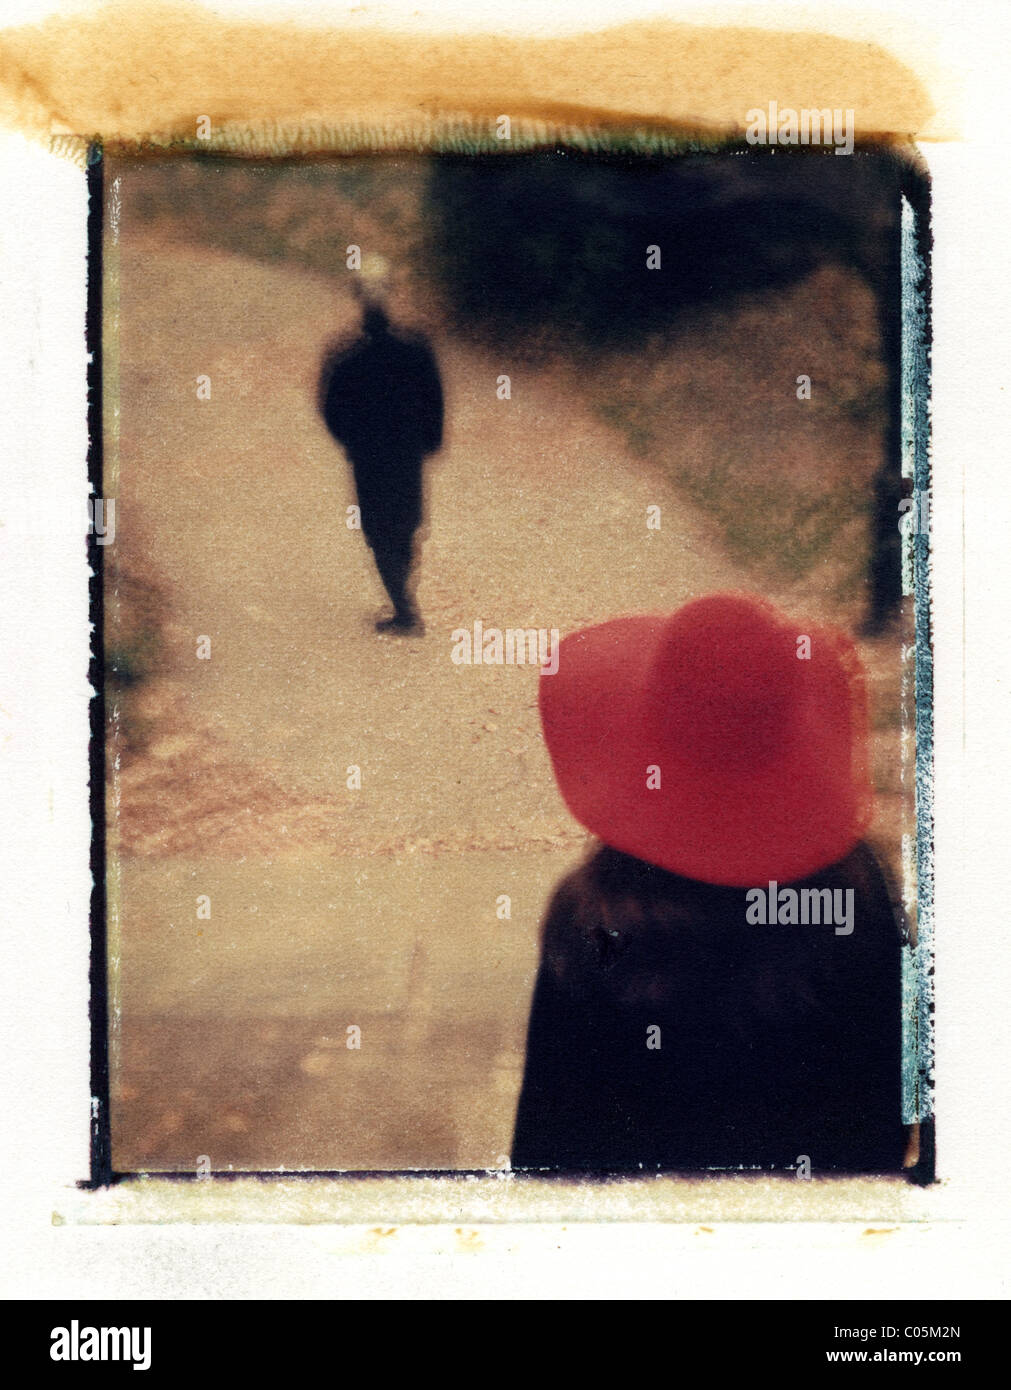 a women in red hat following a man in black from behind Stock Photo